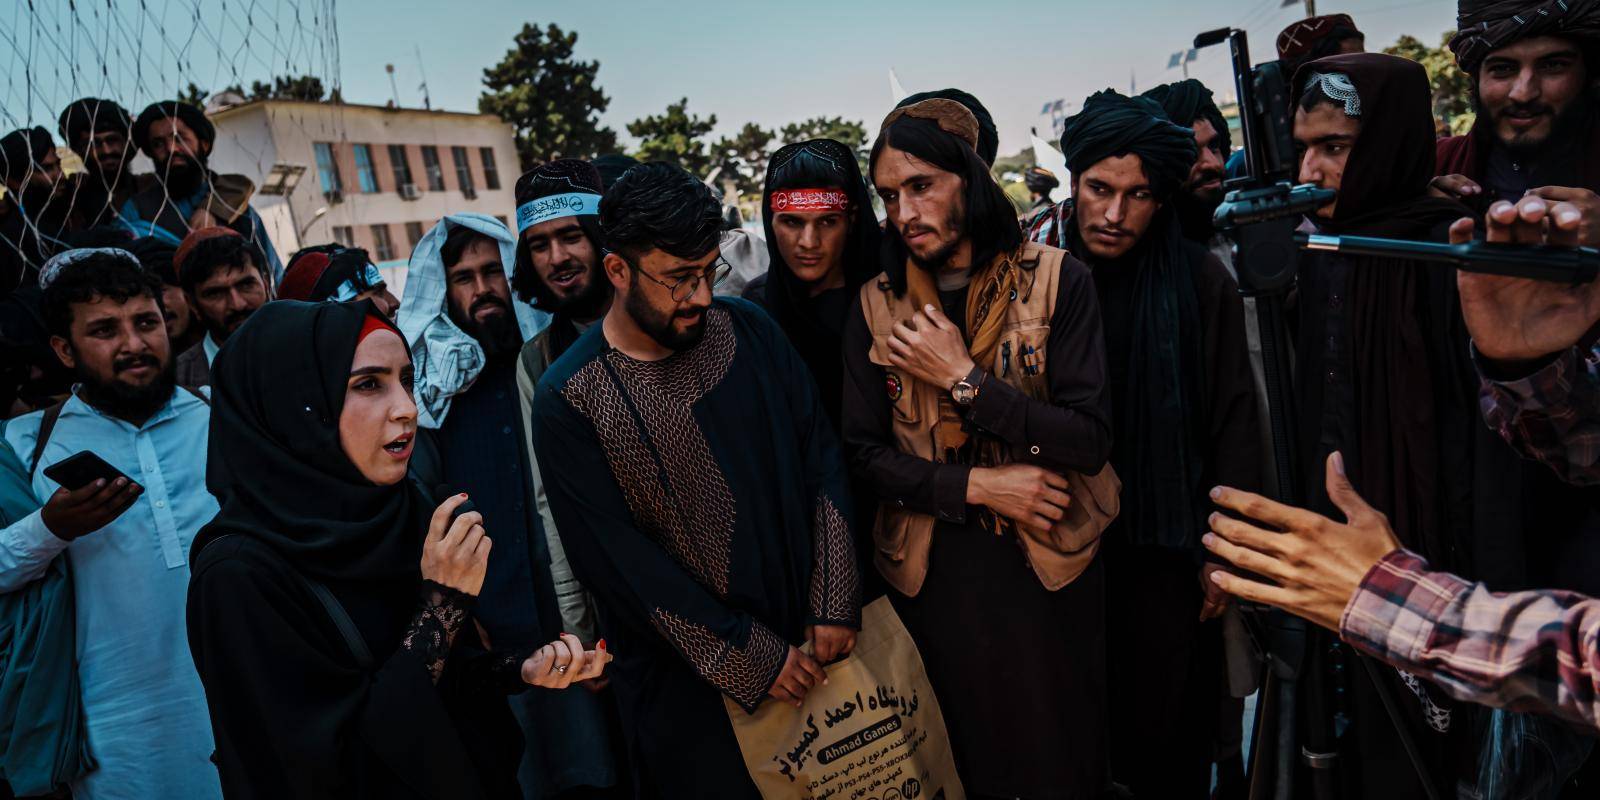 A female journalist talks to camera while standing in front of a crowd of male supporters and members of the Taliban.